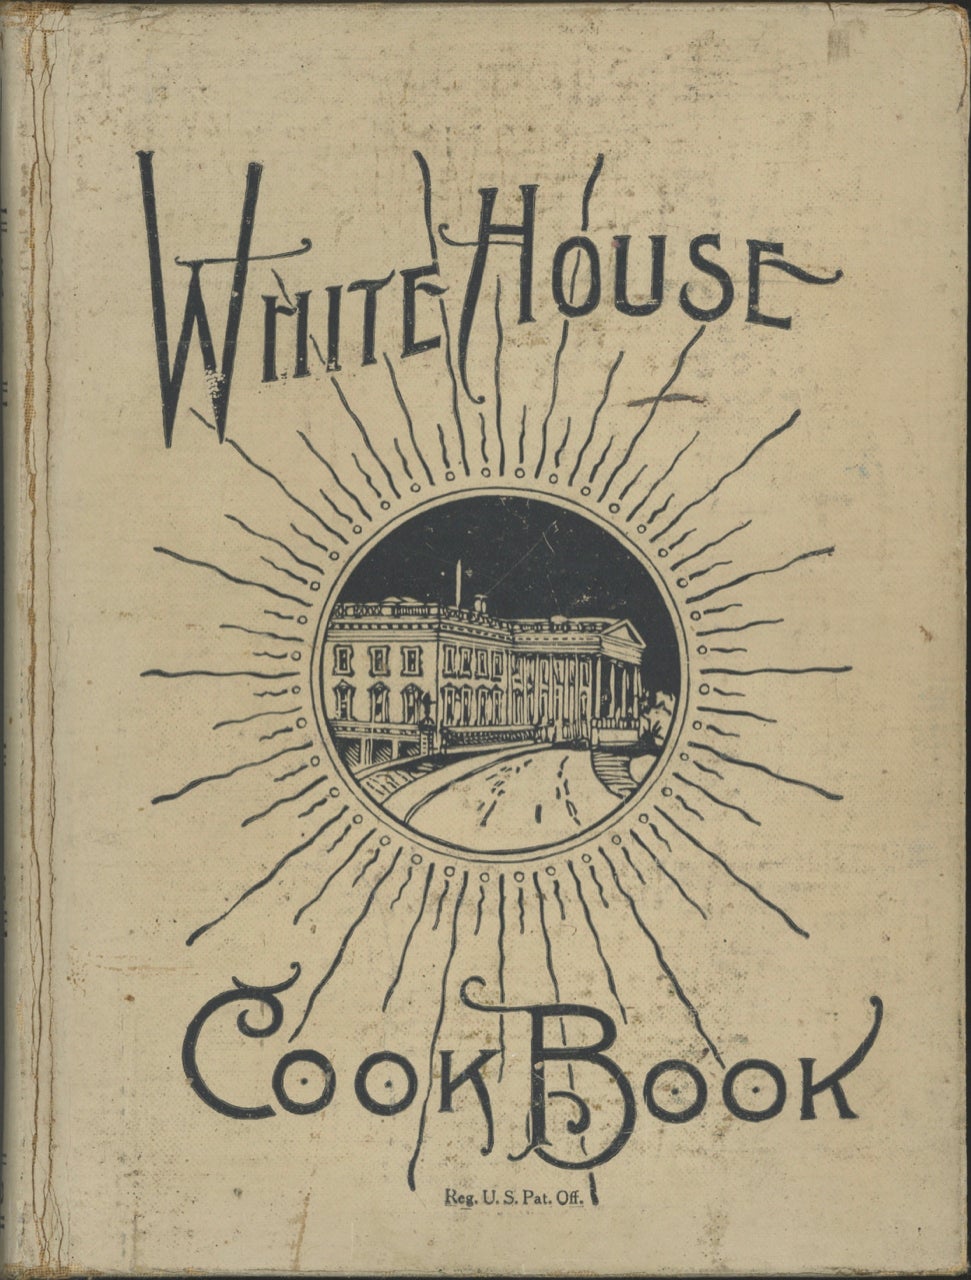 Item #9151 The White House Cook Book : a comprehensive cyclopedia of information for the home; containing cooking, toilet and household recipes, menus, dinner-giving, table etiquette, care of the sick, health suggestions, facts worth knowing, etc. Hugo Ziemann, Mrs. F. L. Gillette, Mrs. Mary E. Dague.